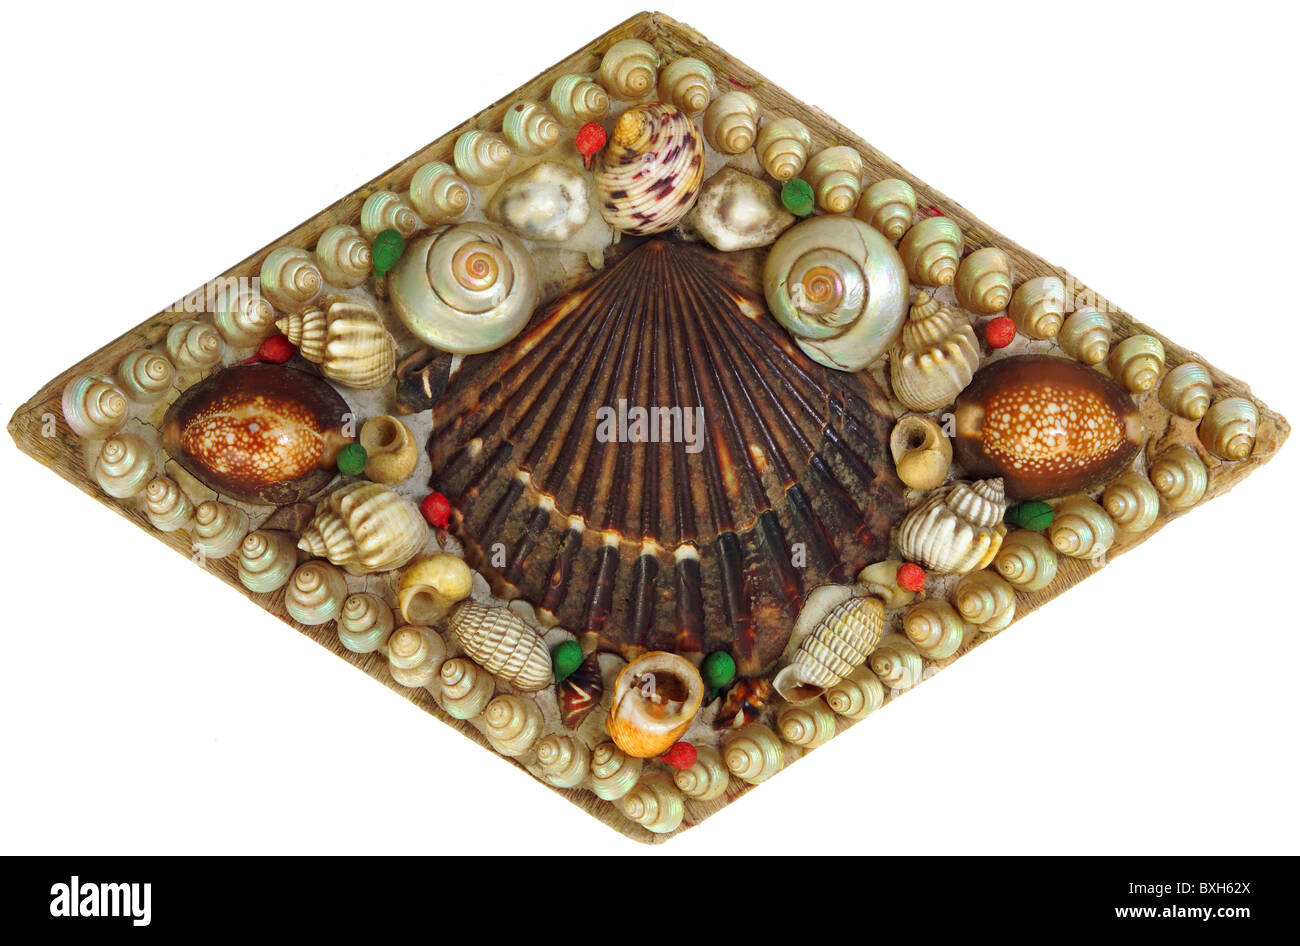 tourism, souvenir, mussel on the top of a jewel case, 20th century, historic, historical, snail shell, snail shells, small present, small gift, small presents, small gifts, bric-a-brac, holiday, vacation, holidays, clipping, cut out, cut-out, cut-outs, 1920s, Additional-Rights-Clearences-Not Available Stock Photo